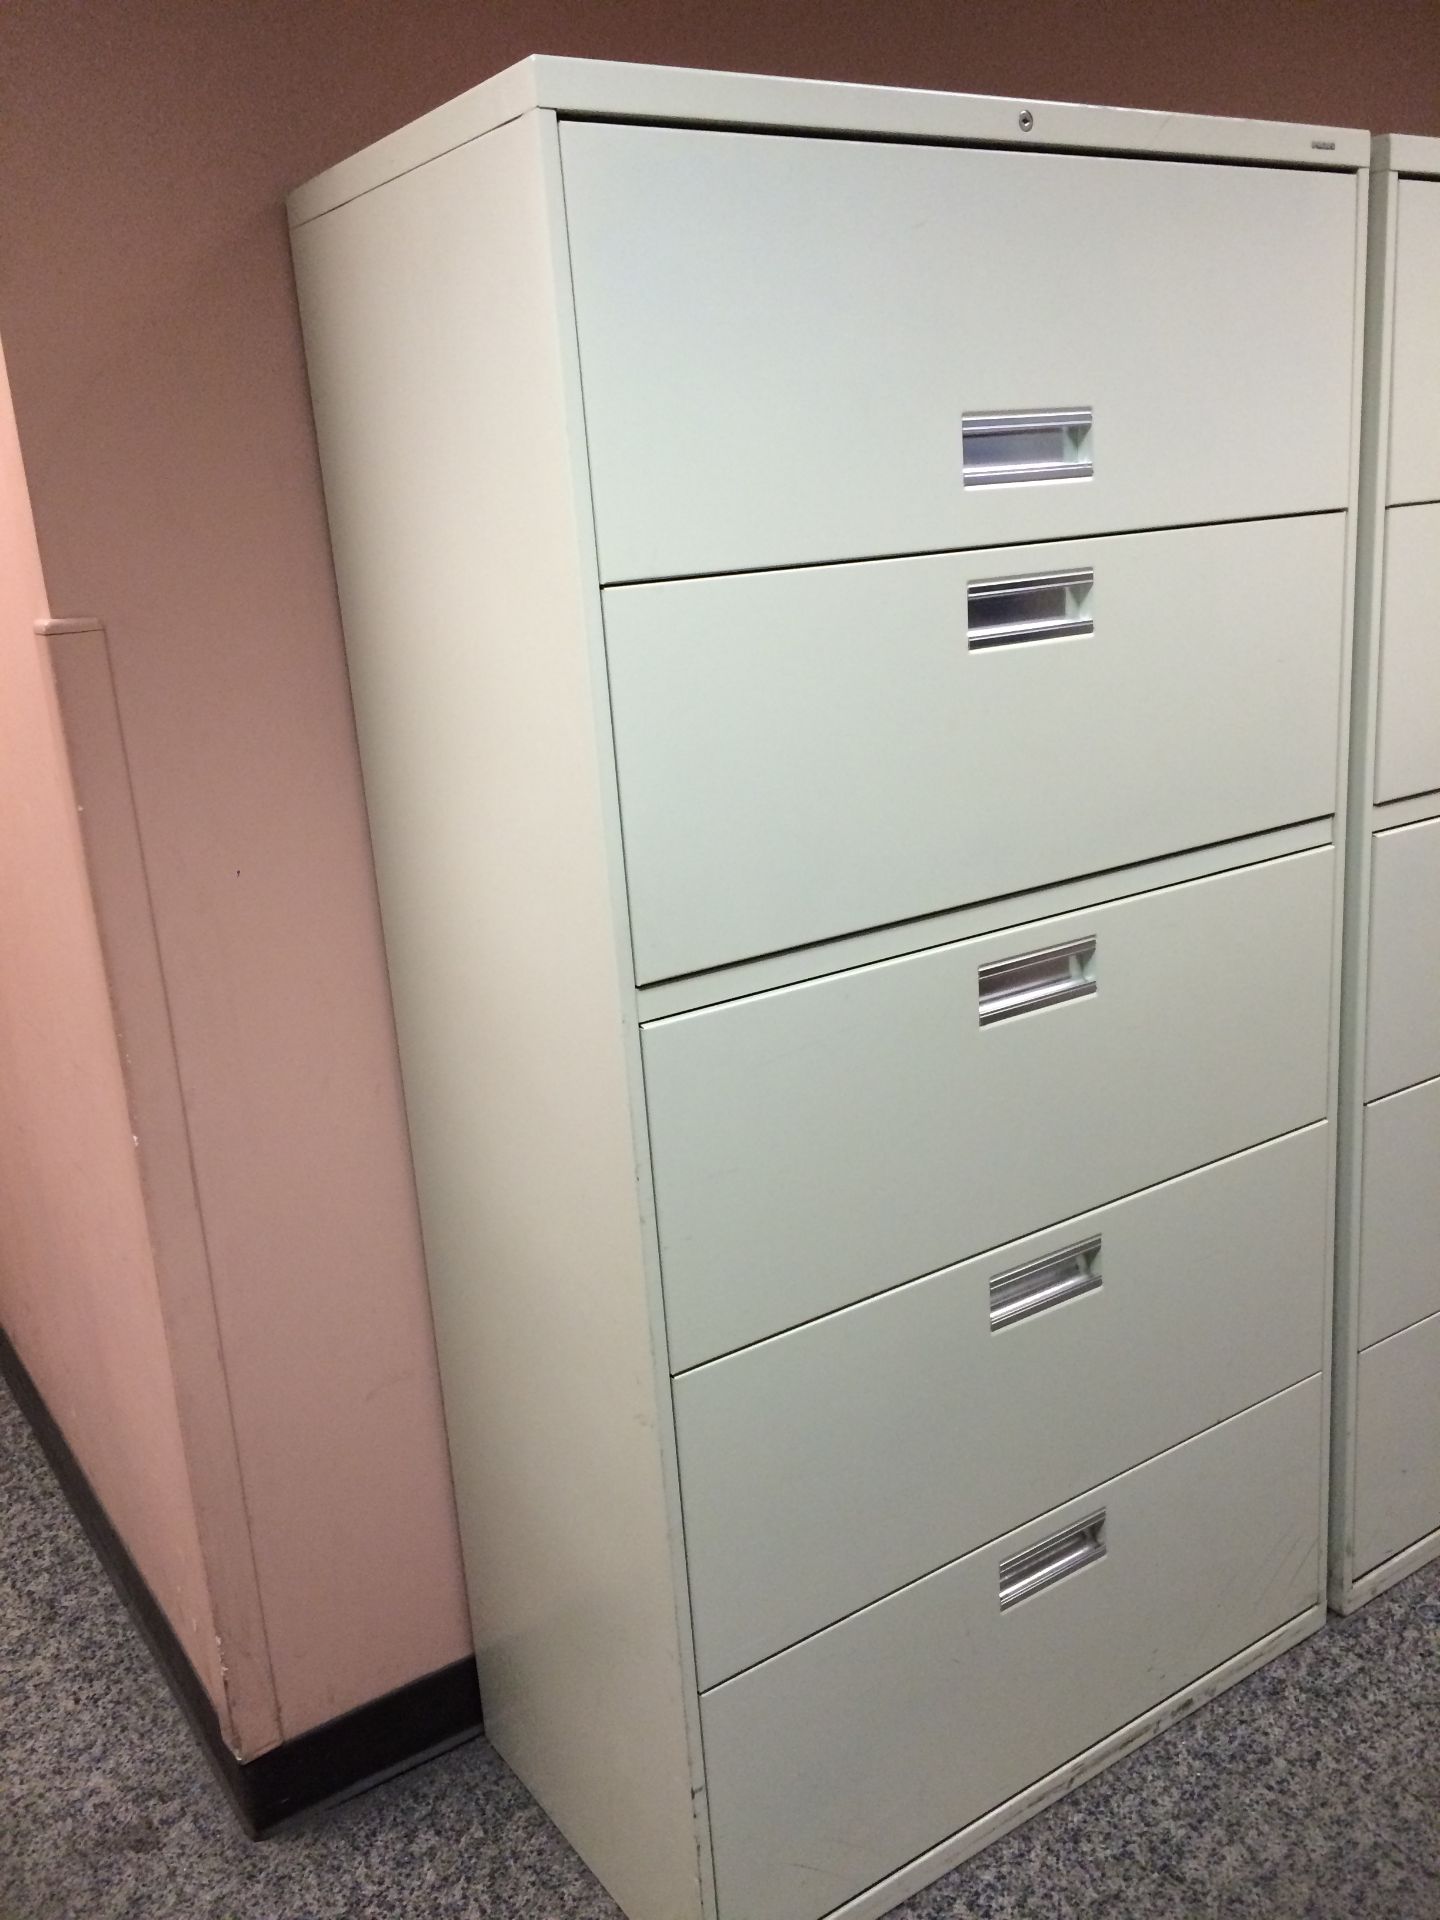 ONE 5 DRAWER LATERAL FILE CABINET AND 1 PCS OF 2 DRAWER LATERAL FILE CABINET, ONE MONEY.